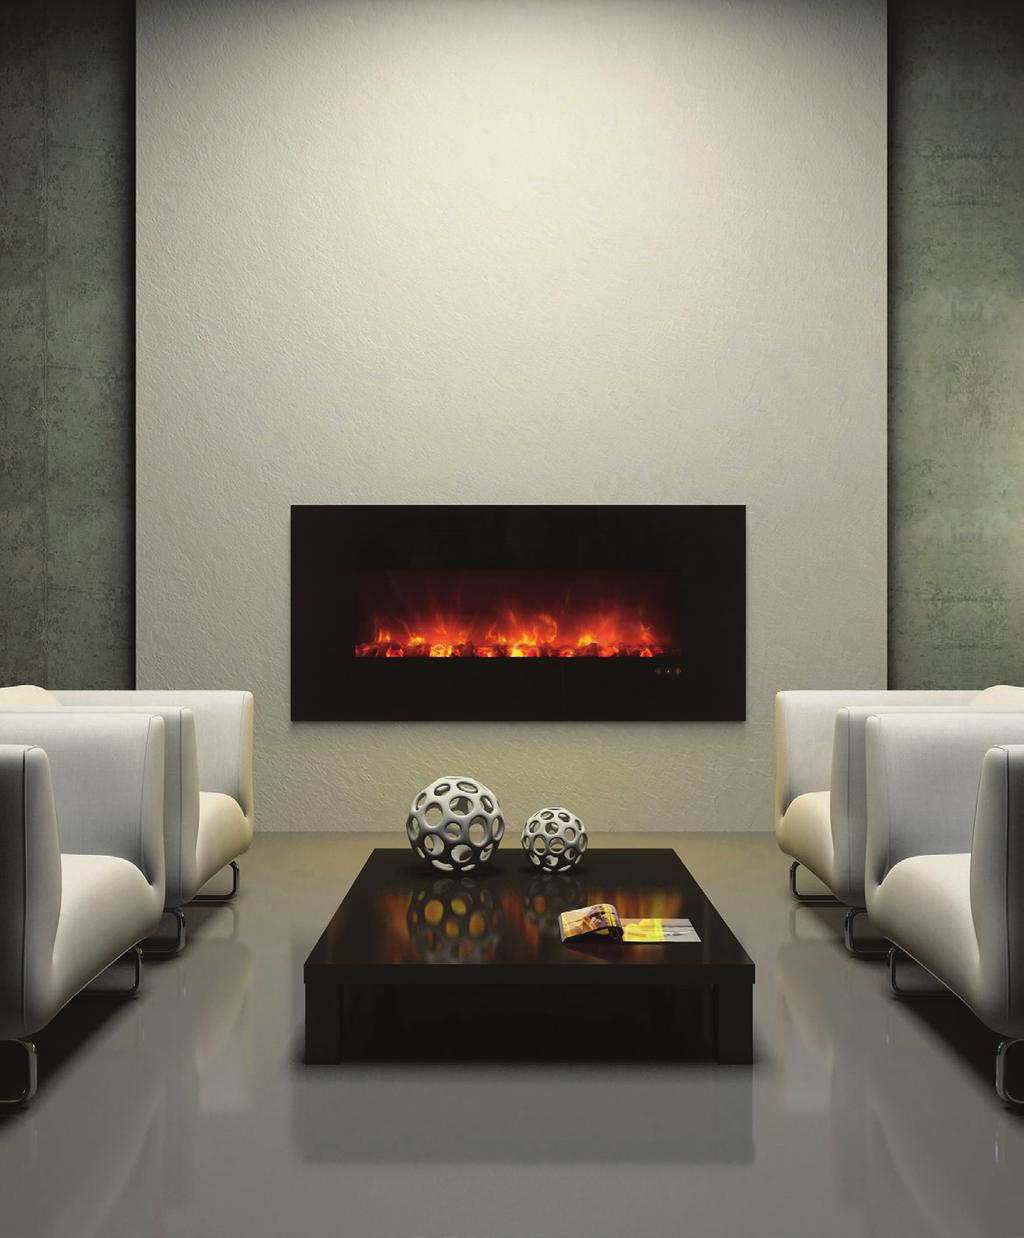 With an unsurpassed realistic flame pattern, these models are packed with features including recessed or wall